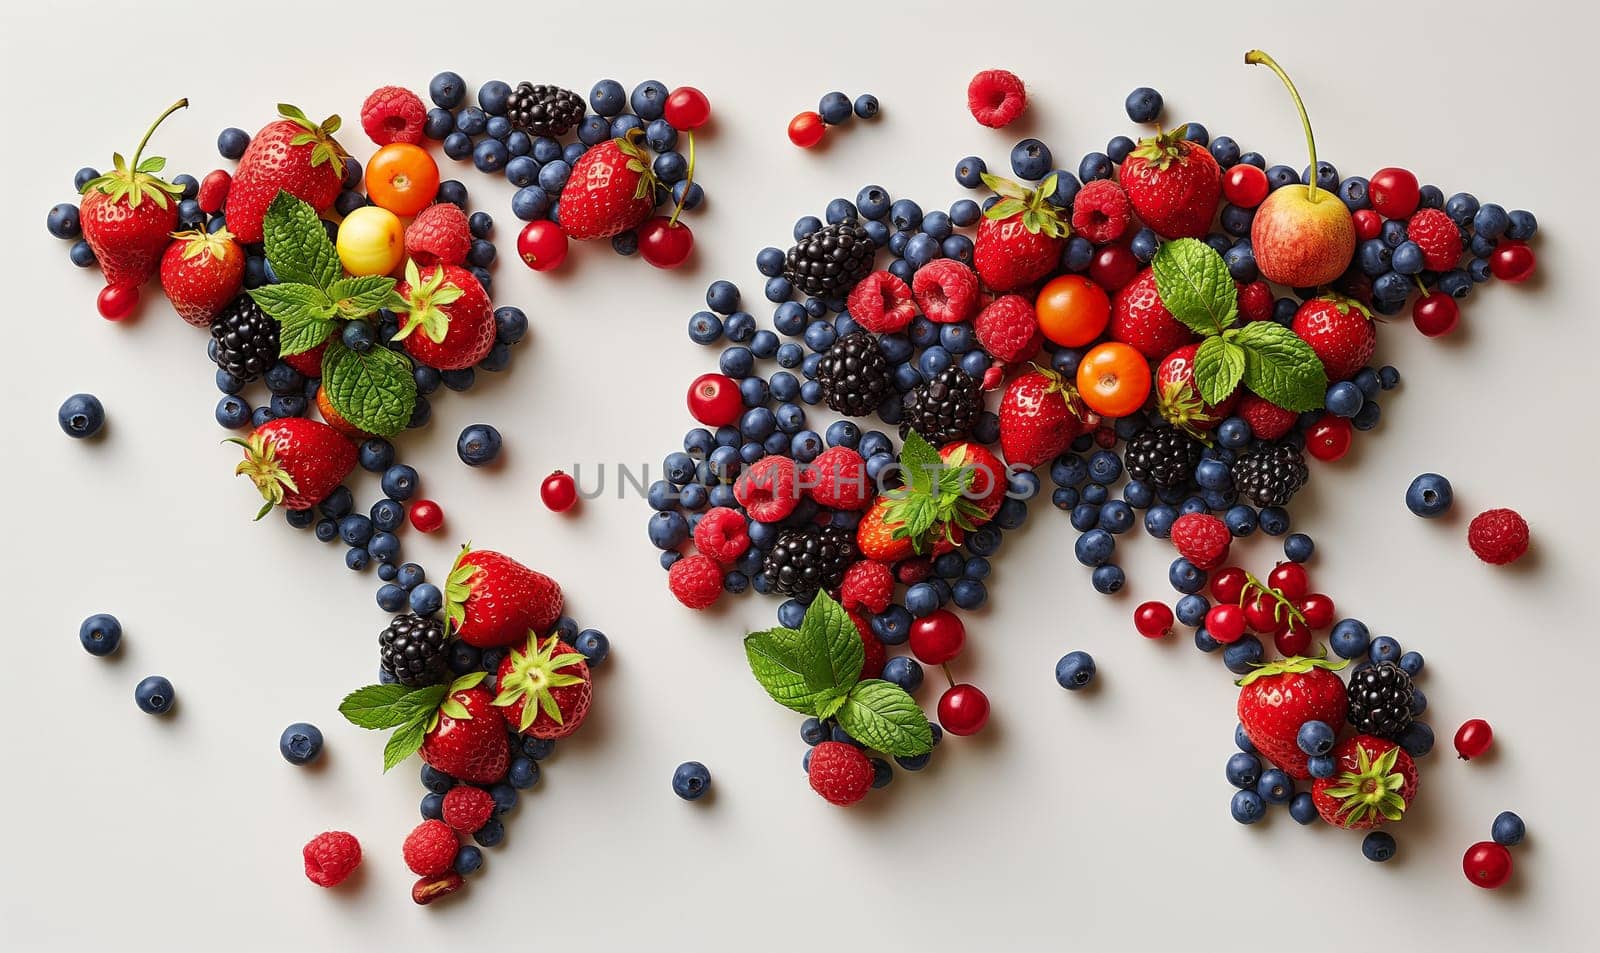 World map made of fruits and berries. by Fischeron